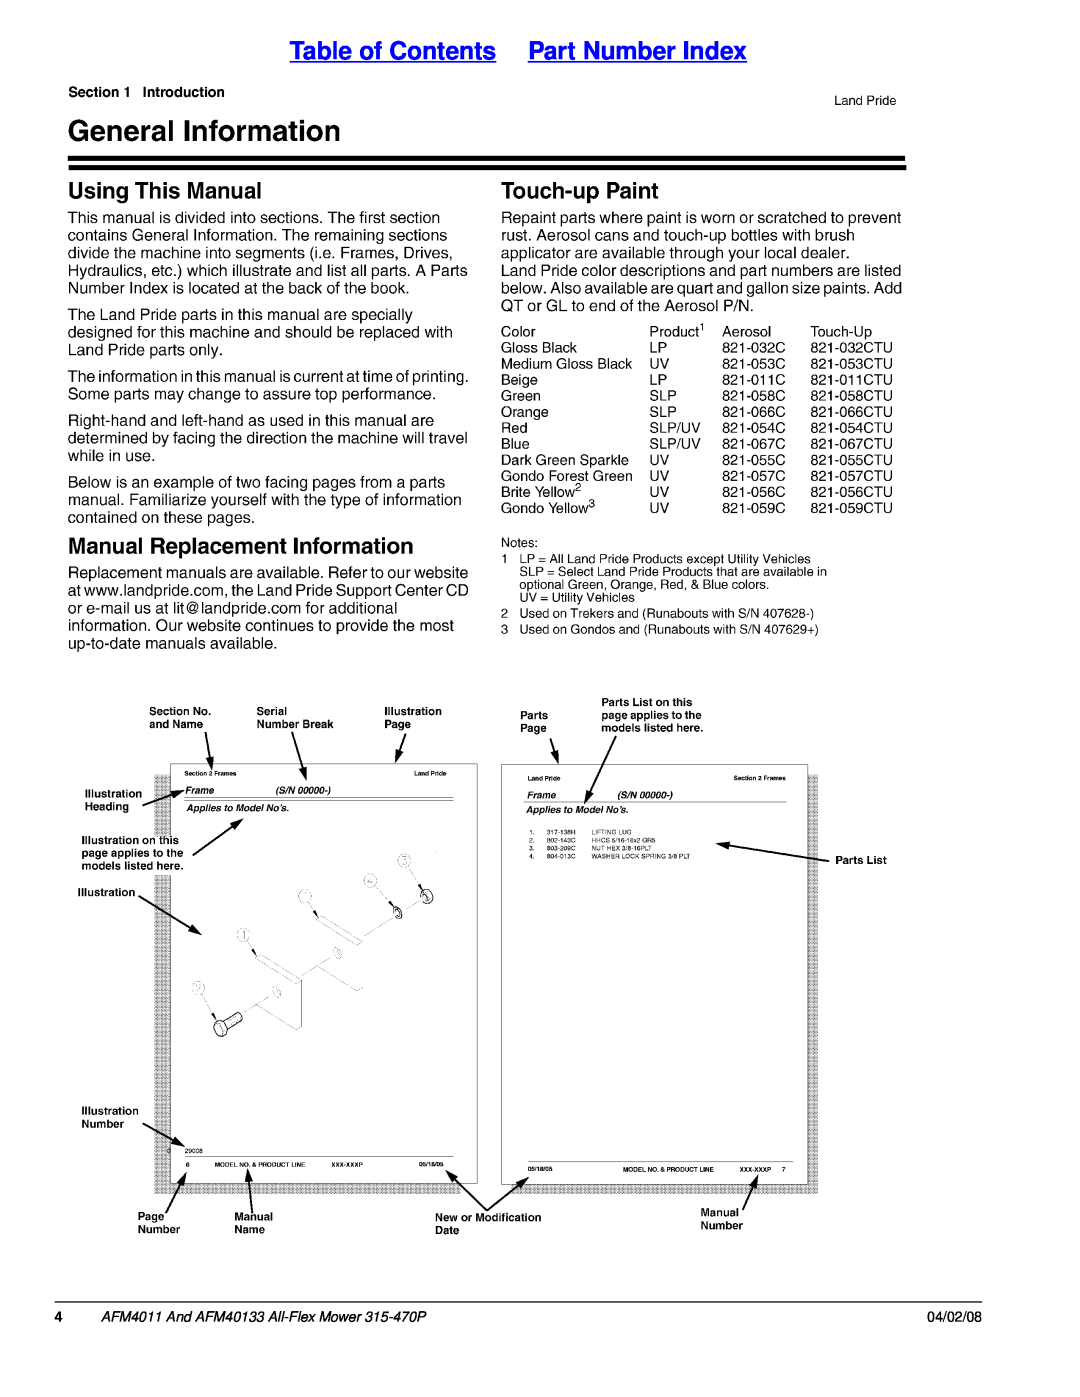 Land Pride manual Table of Contents Part Number Index, AFM4011 And AFM40133 All-FlexMower 315-470P, 04/02/08 